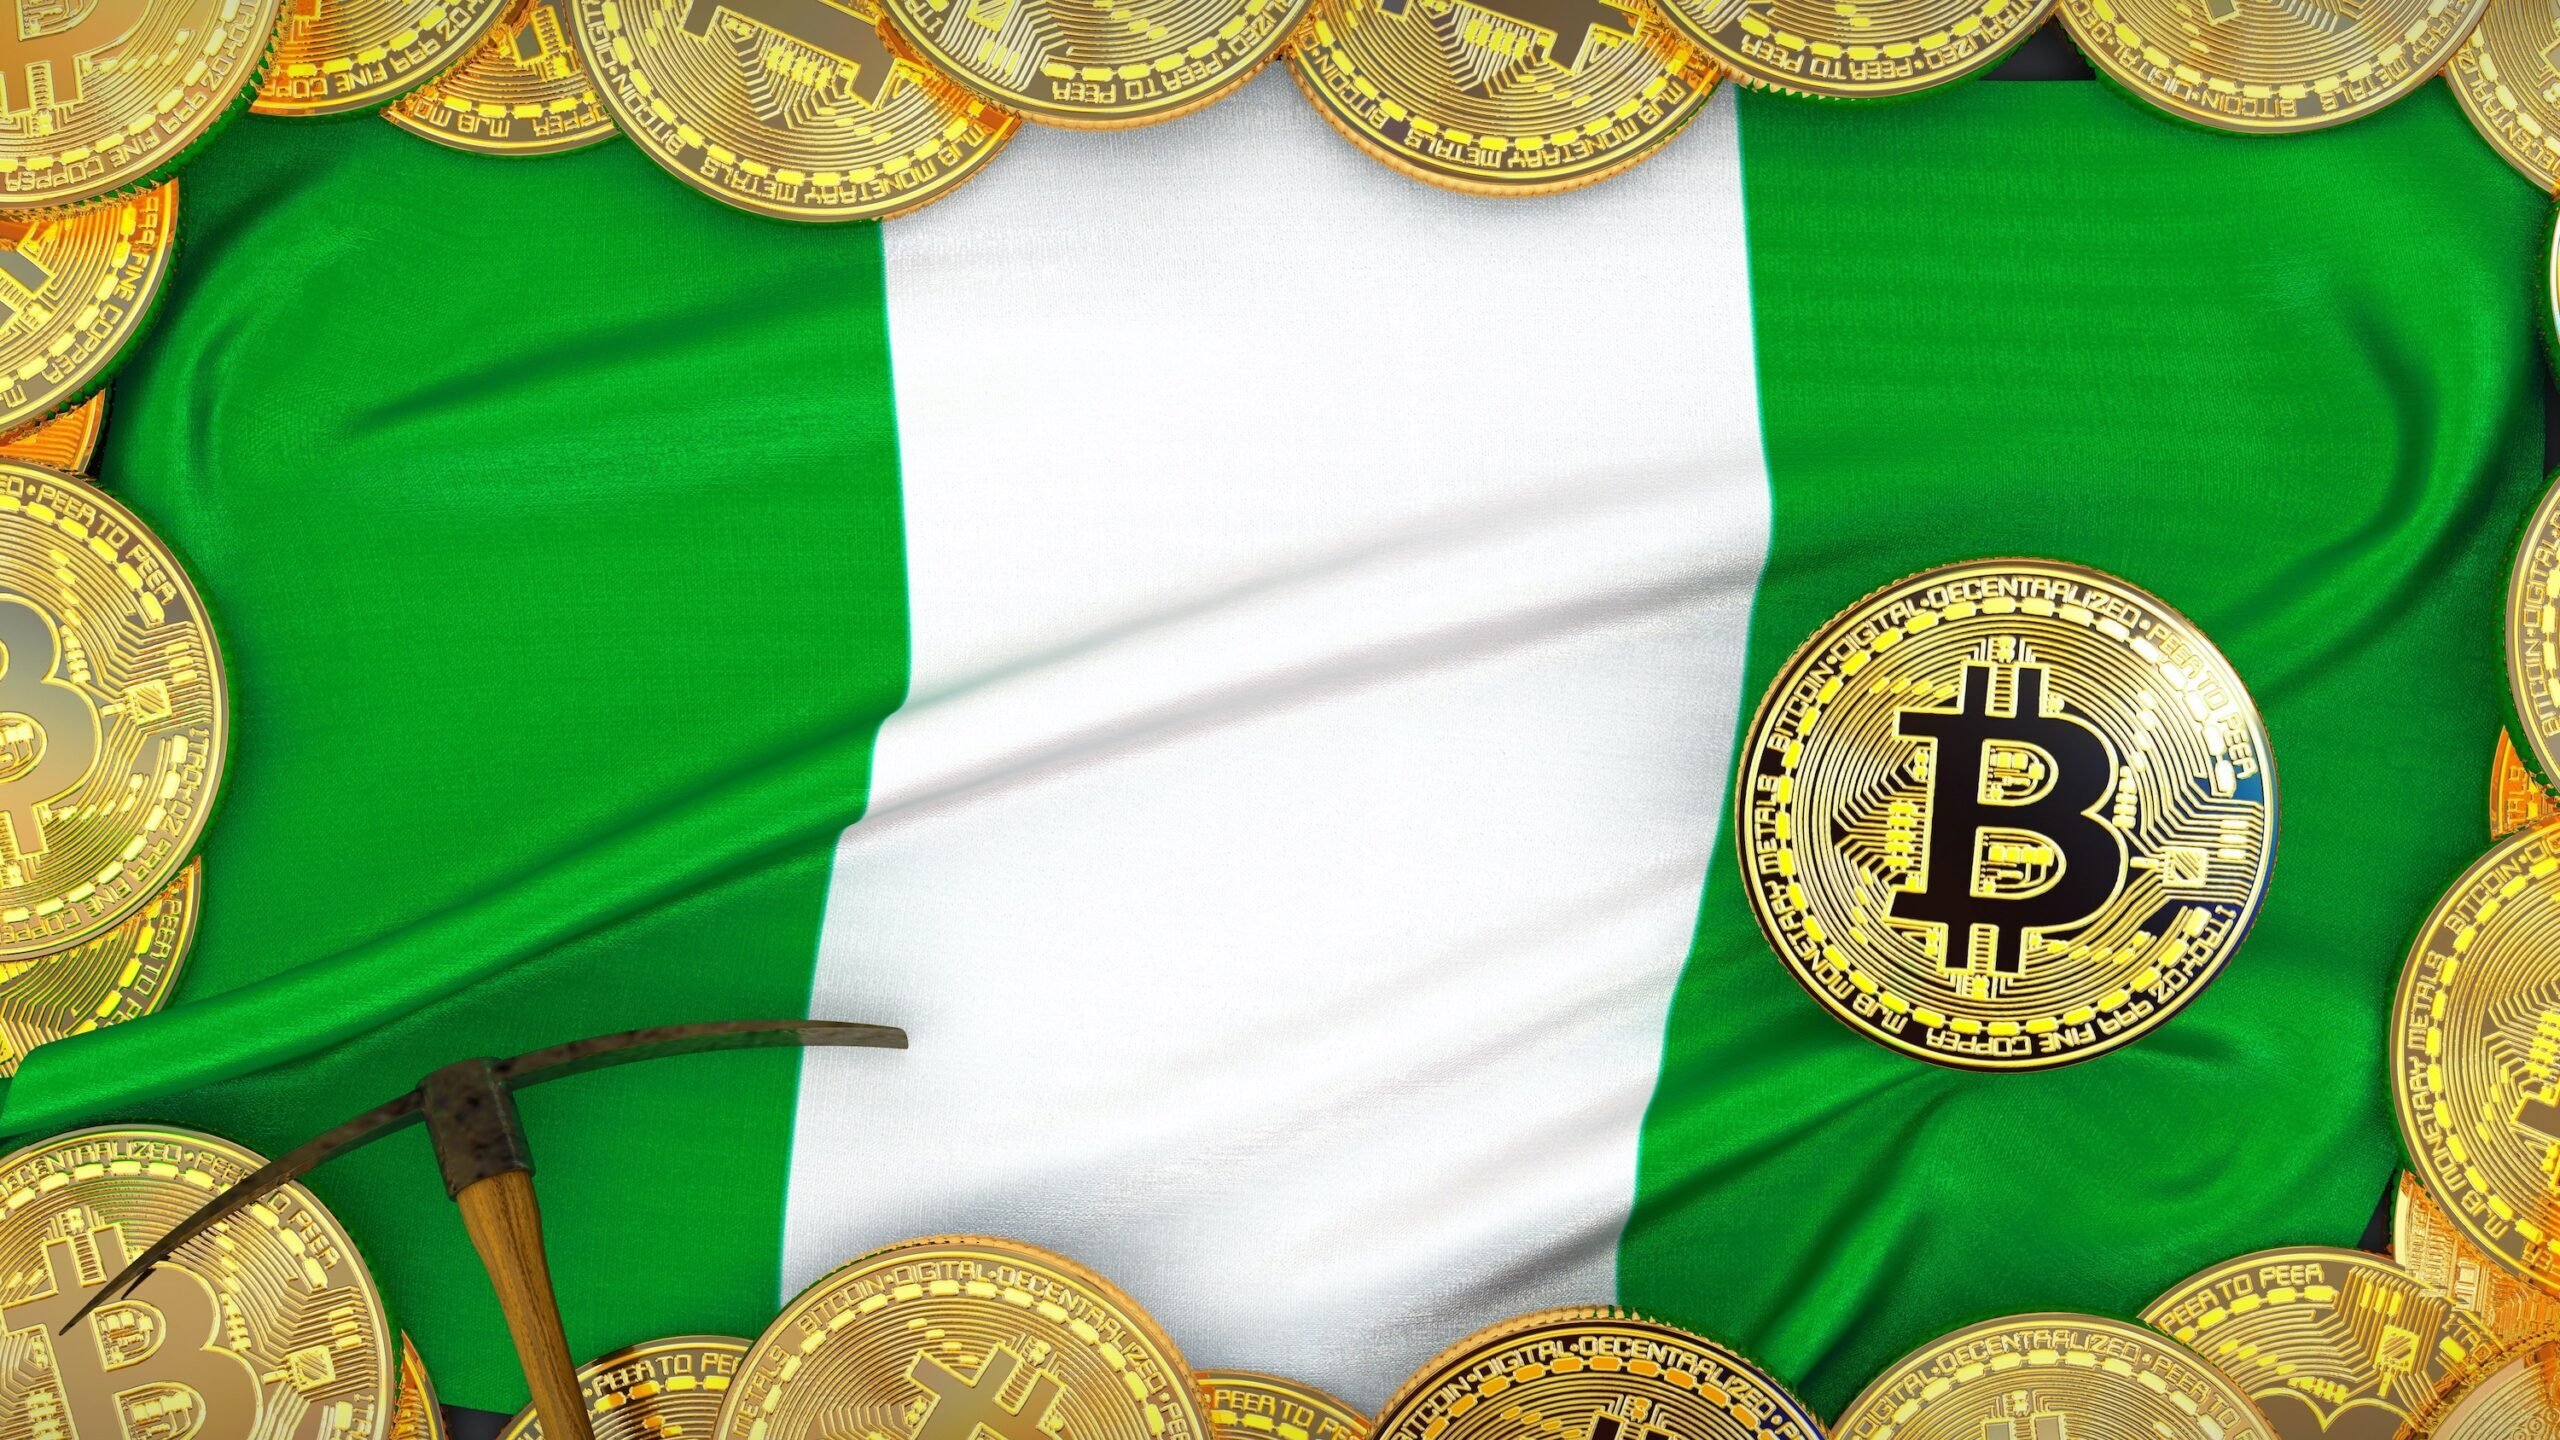 Nigeria is using Bitcoin in the way that Satoshi Nakamoto envisaged. Image: Shutterstock